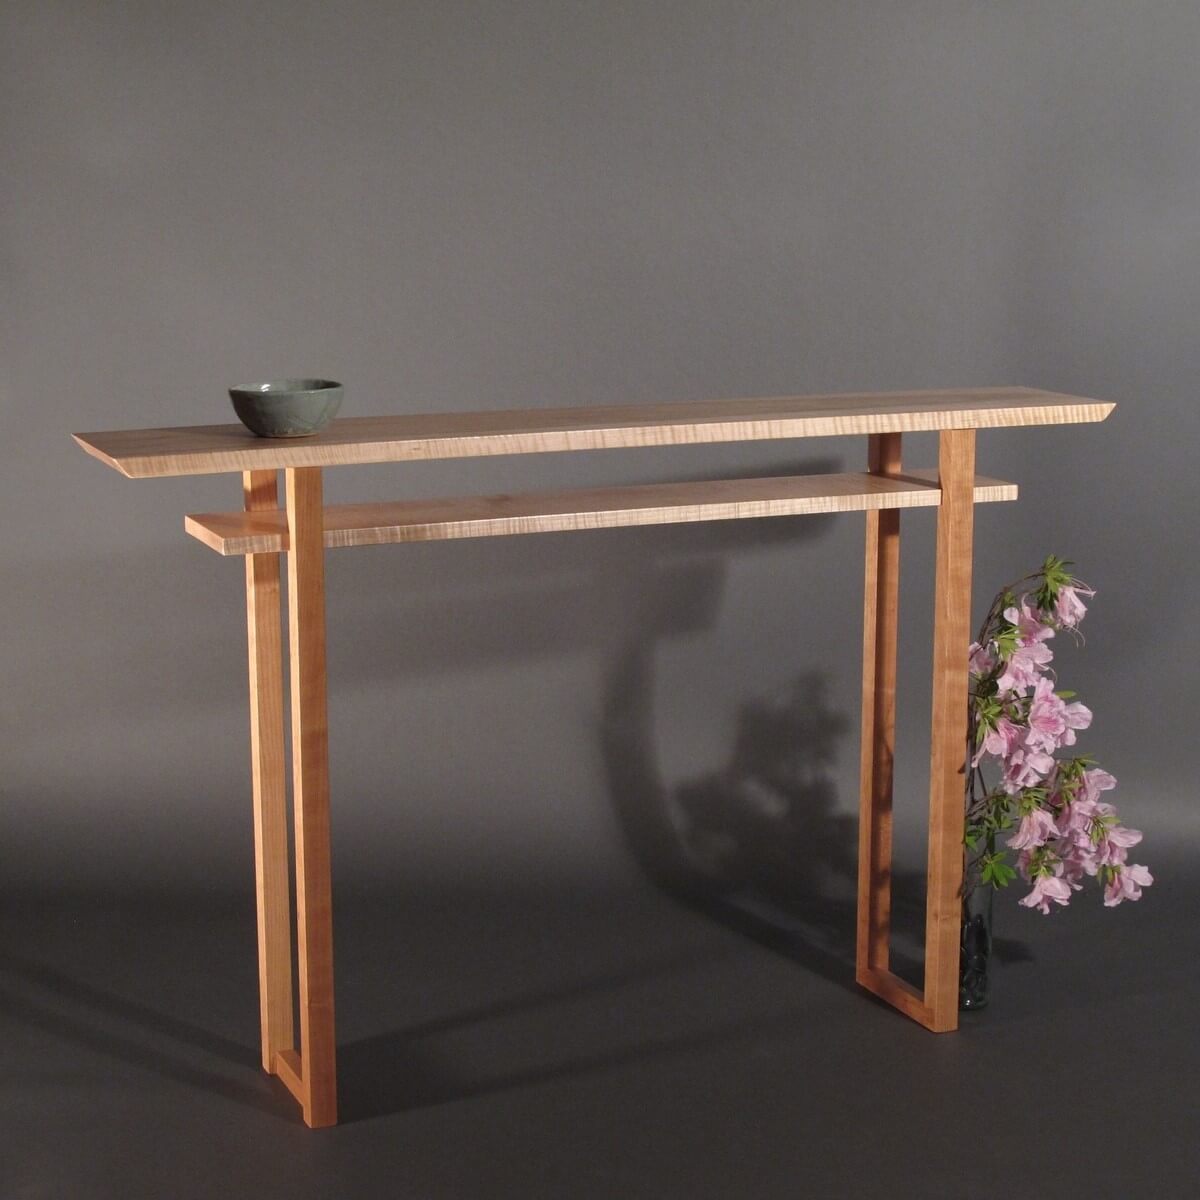 A minimalist hallway console table hand-crafted from tiger maple and cherry wood.  Furniture designs from Mokuzai Furniture